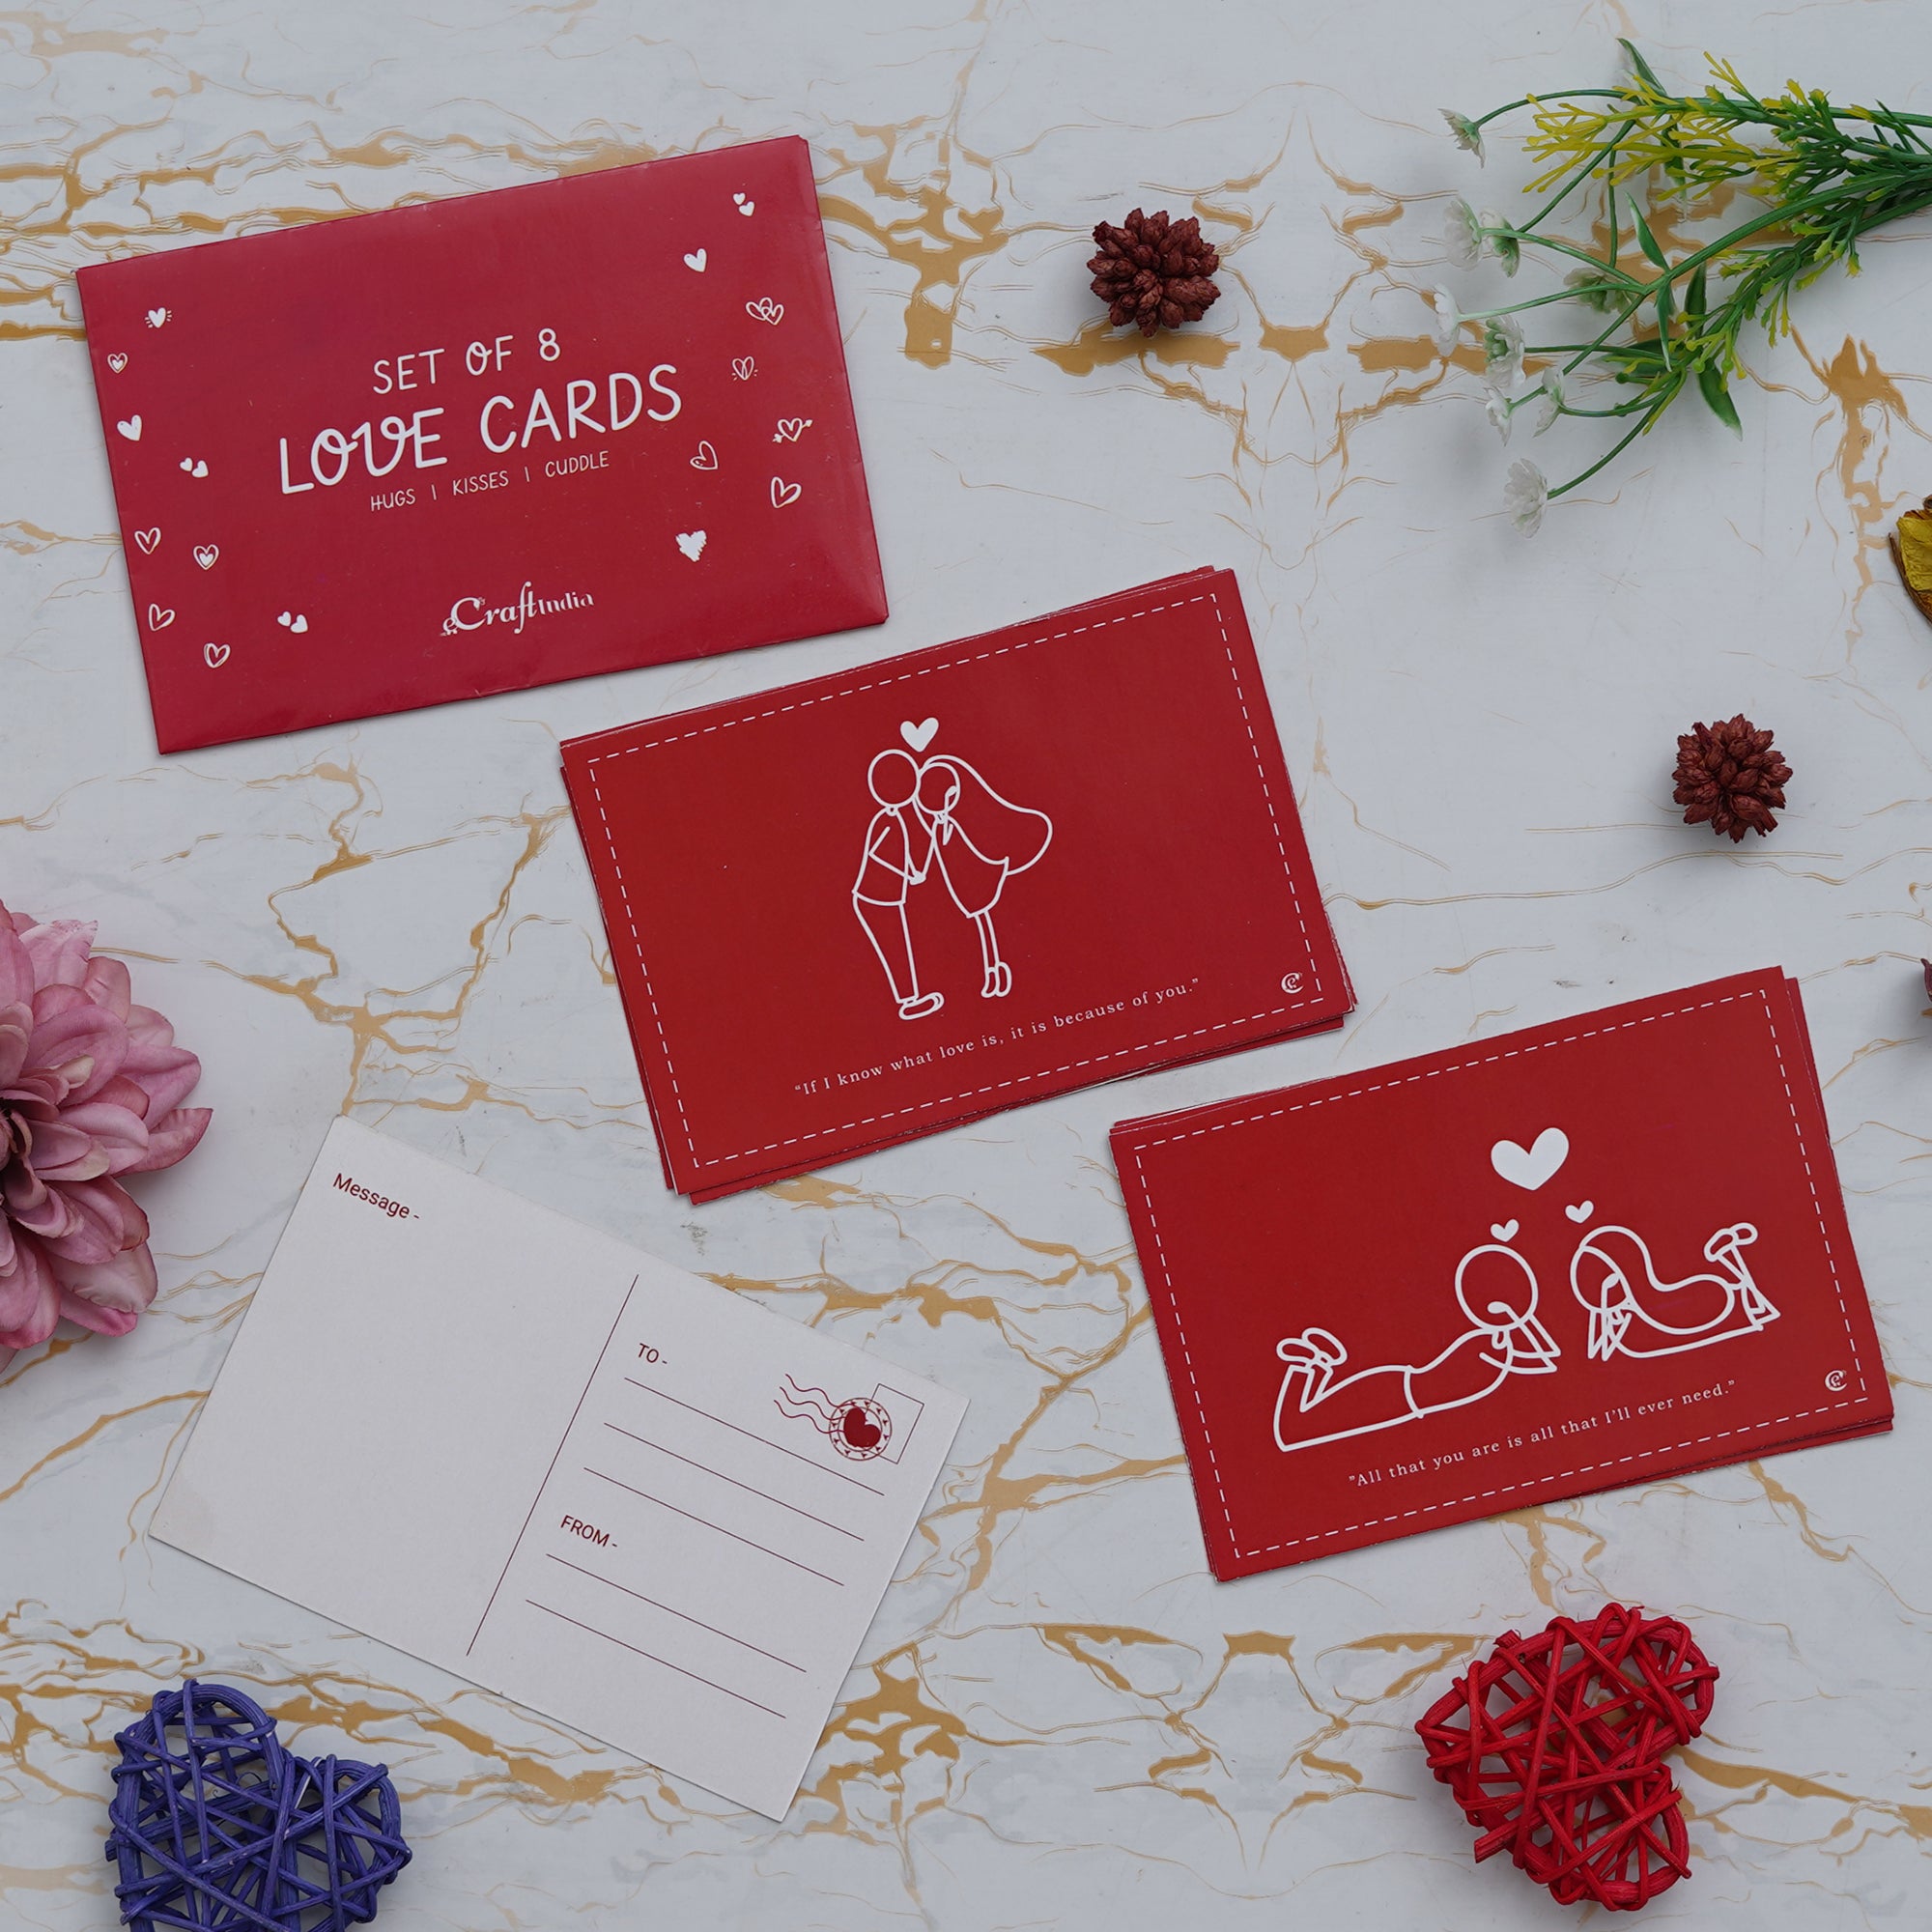 Valentine Combo of Pack of 8 Love Gift Cards, Red Gift Box with Teddy & Roses, "20 Reasons Why I Love You" Printed on Little Red Hearts Decorative Wooden Gift Set Box 1